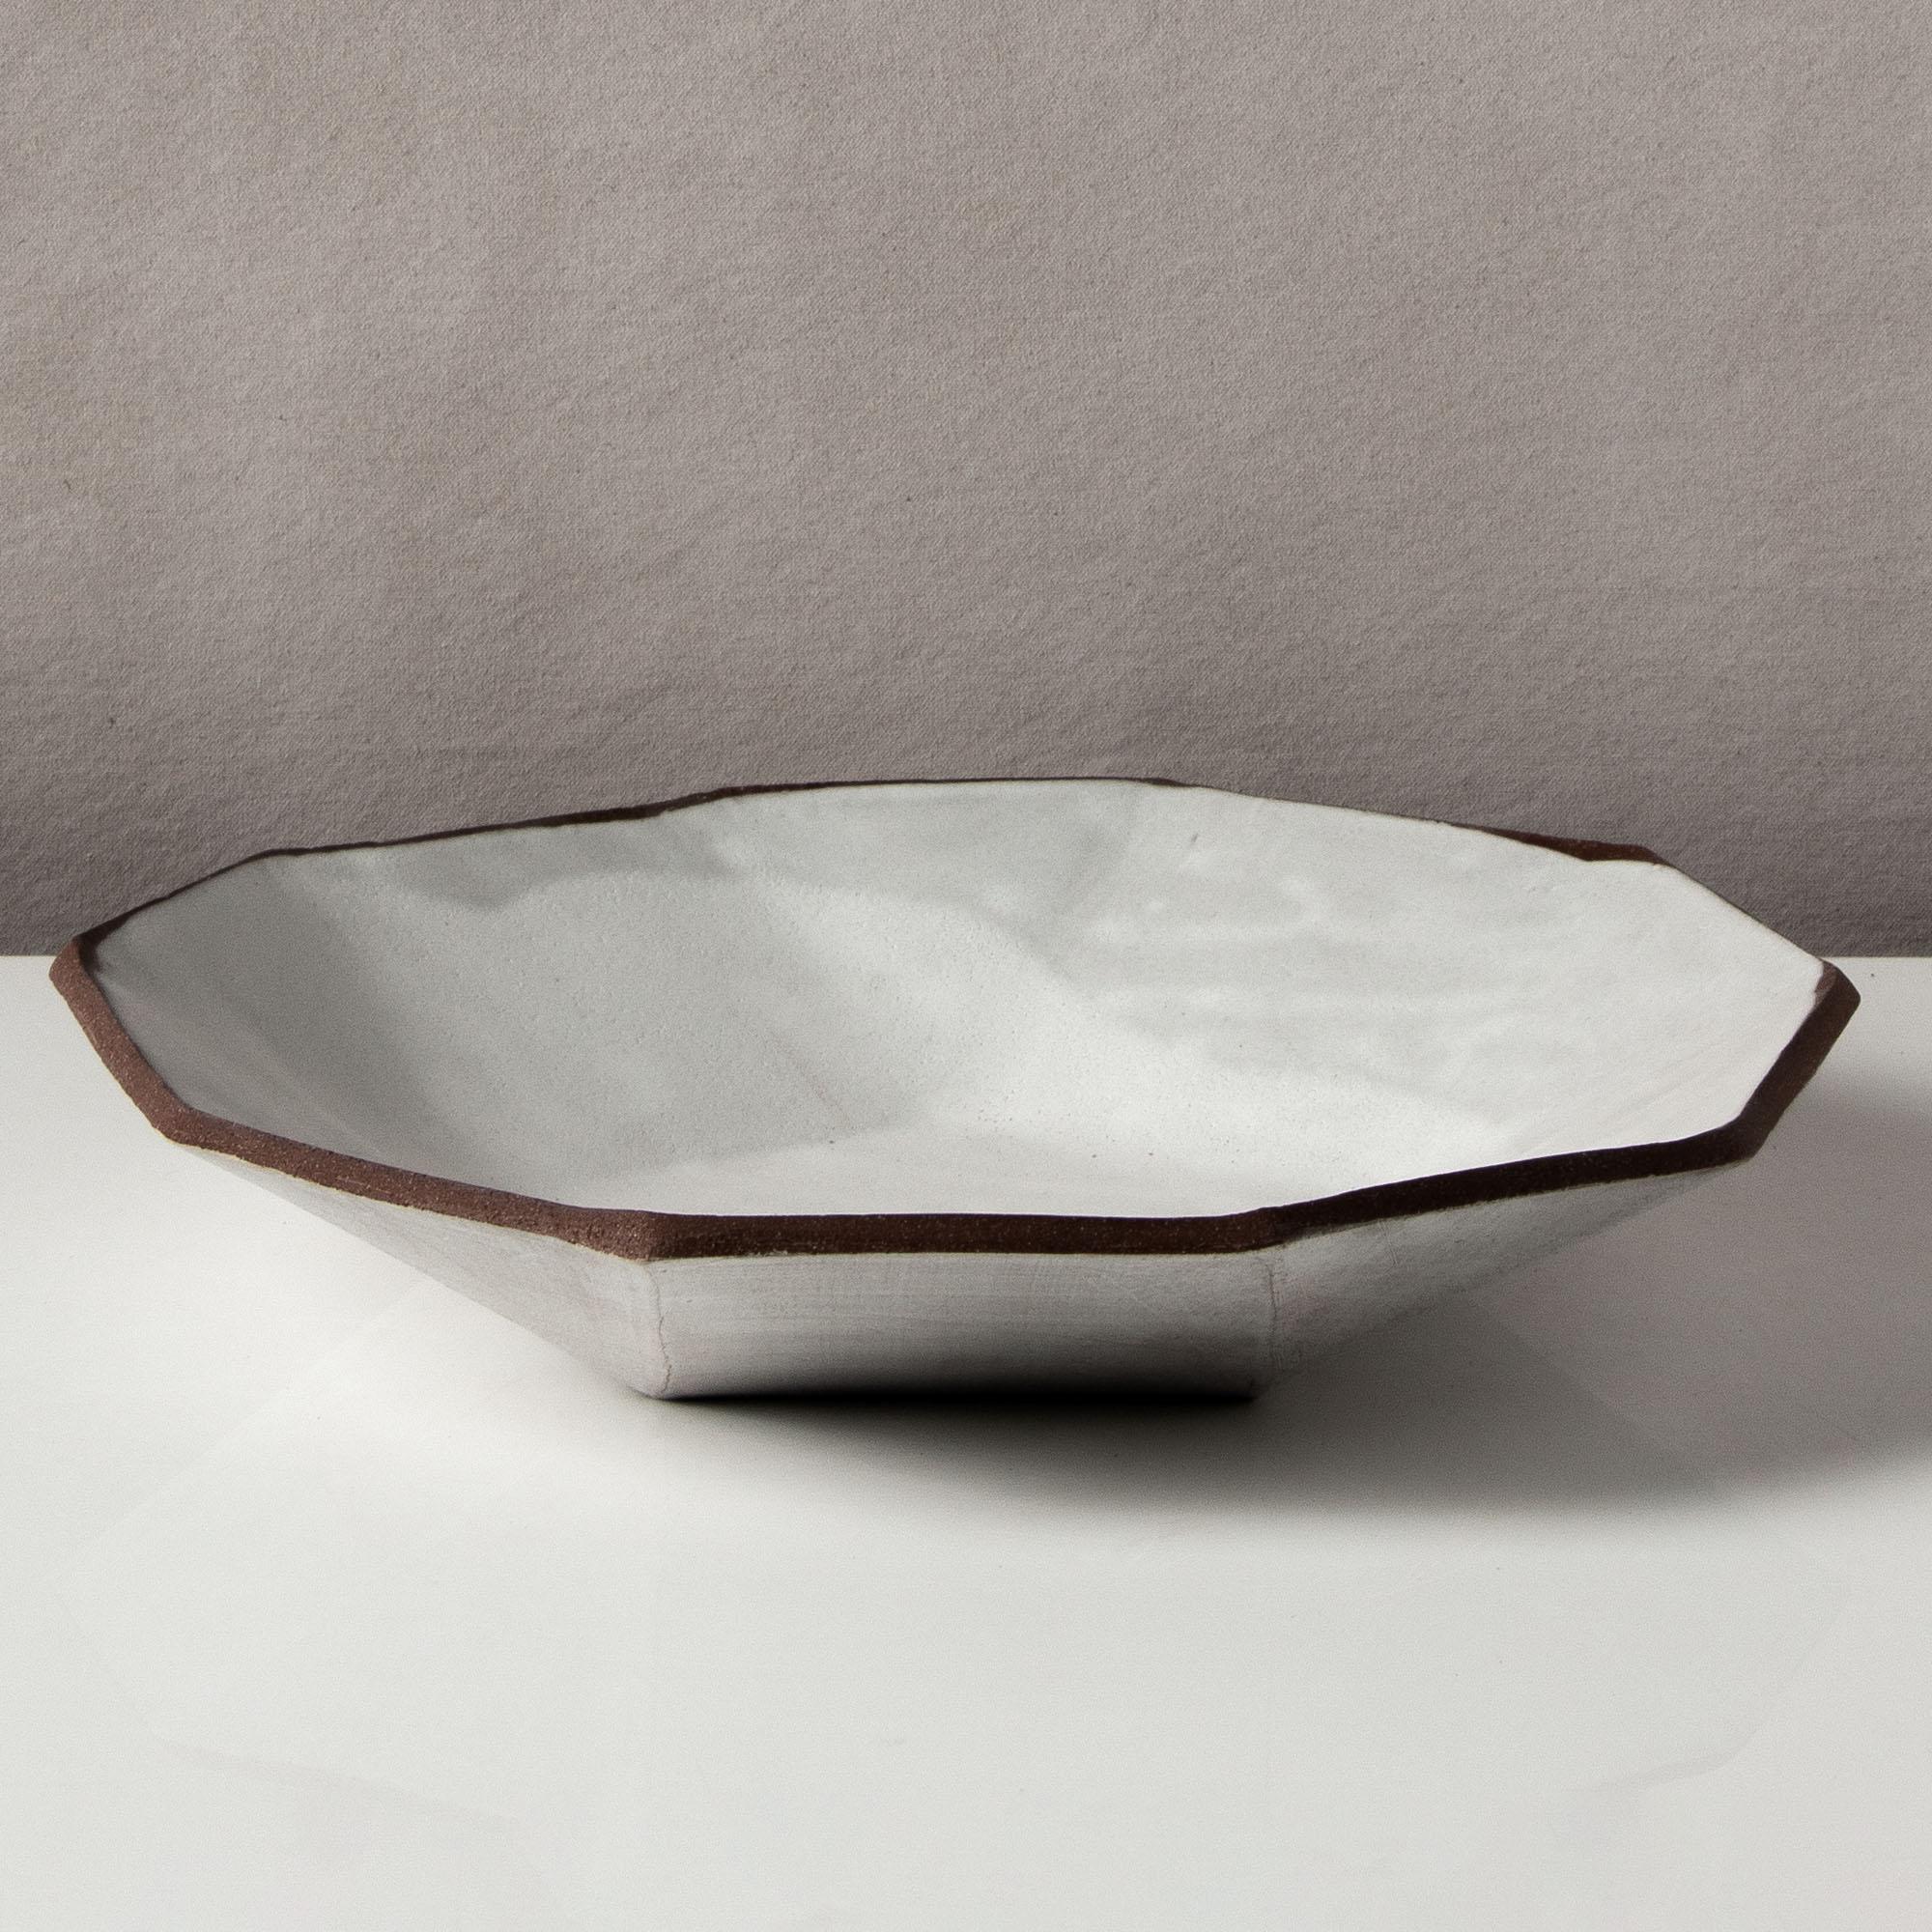 This shallow ceramic bowl combines clean geometric lines with the warmth and individuality inherent in handmade work; it's the perfect statement for a coffee table or sideboard. Each dish is assembled individually from flat sheets of a rich